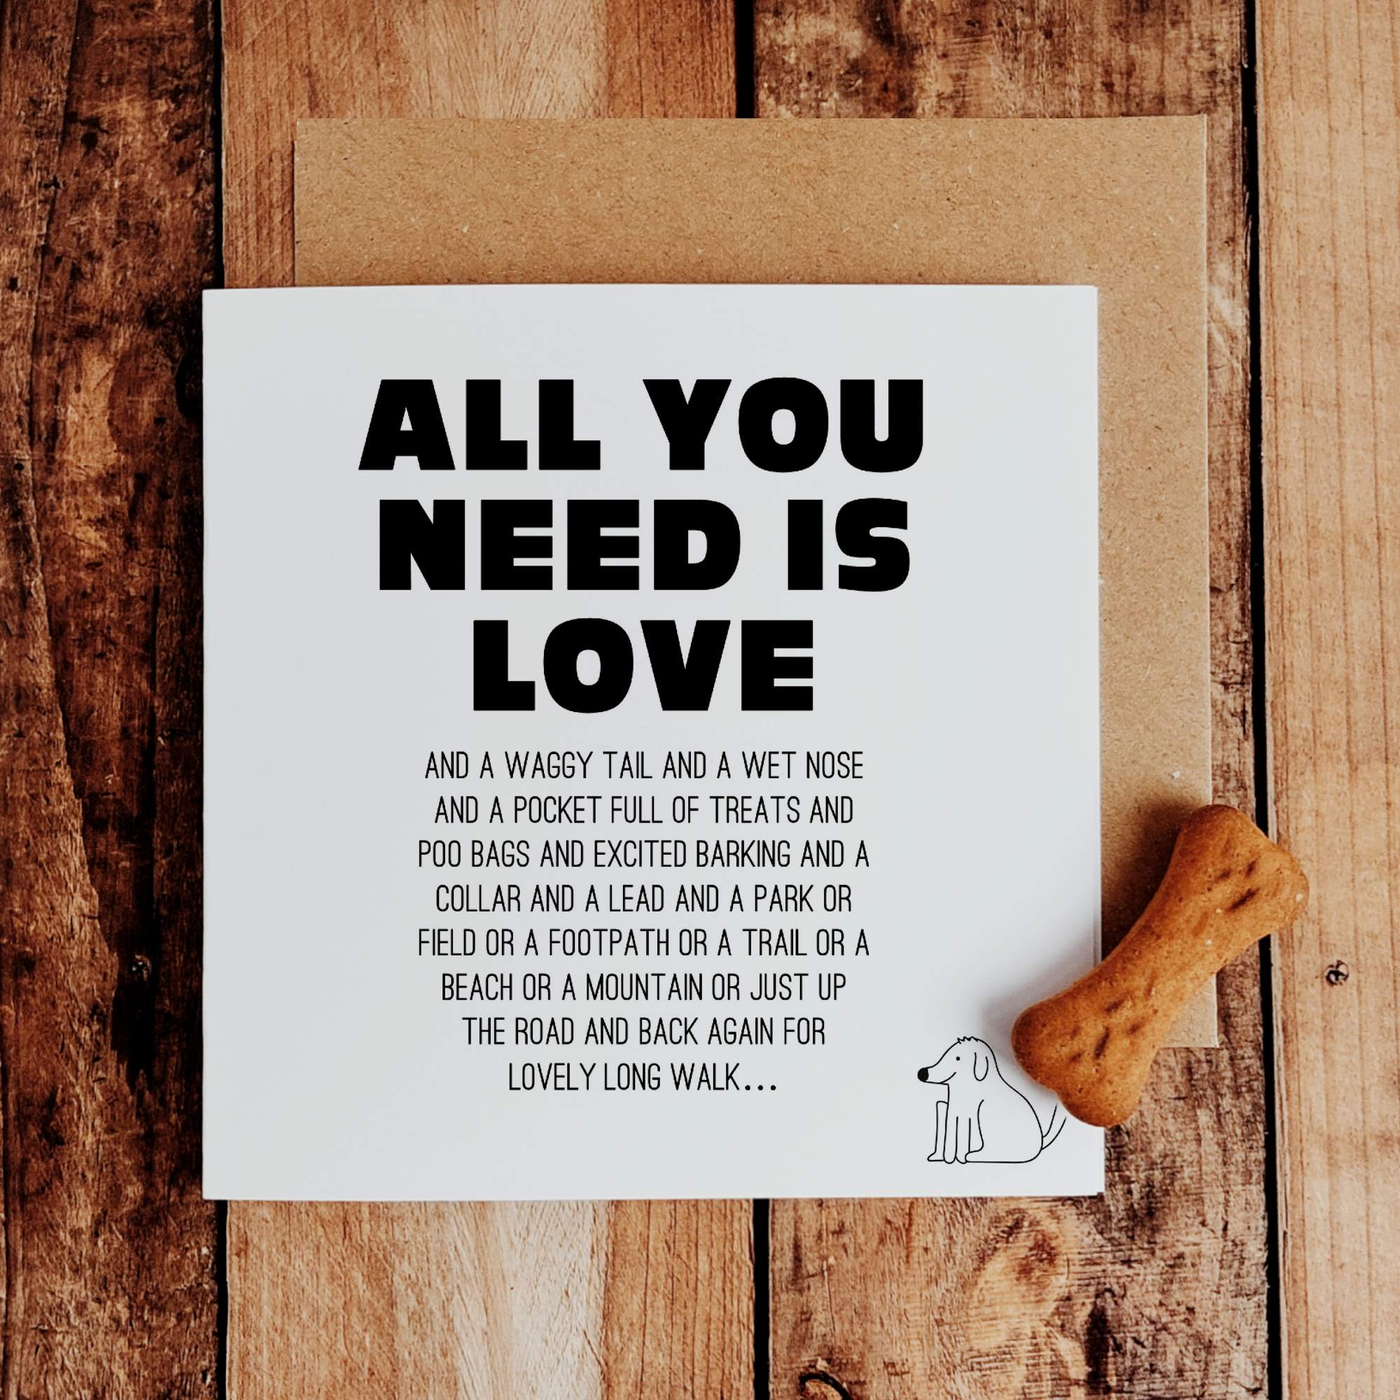 All you need is love...dogs - Greetings Card-Worry Less Design-Dogs,Greetings-Card